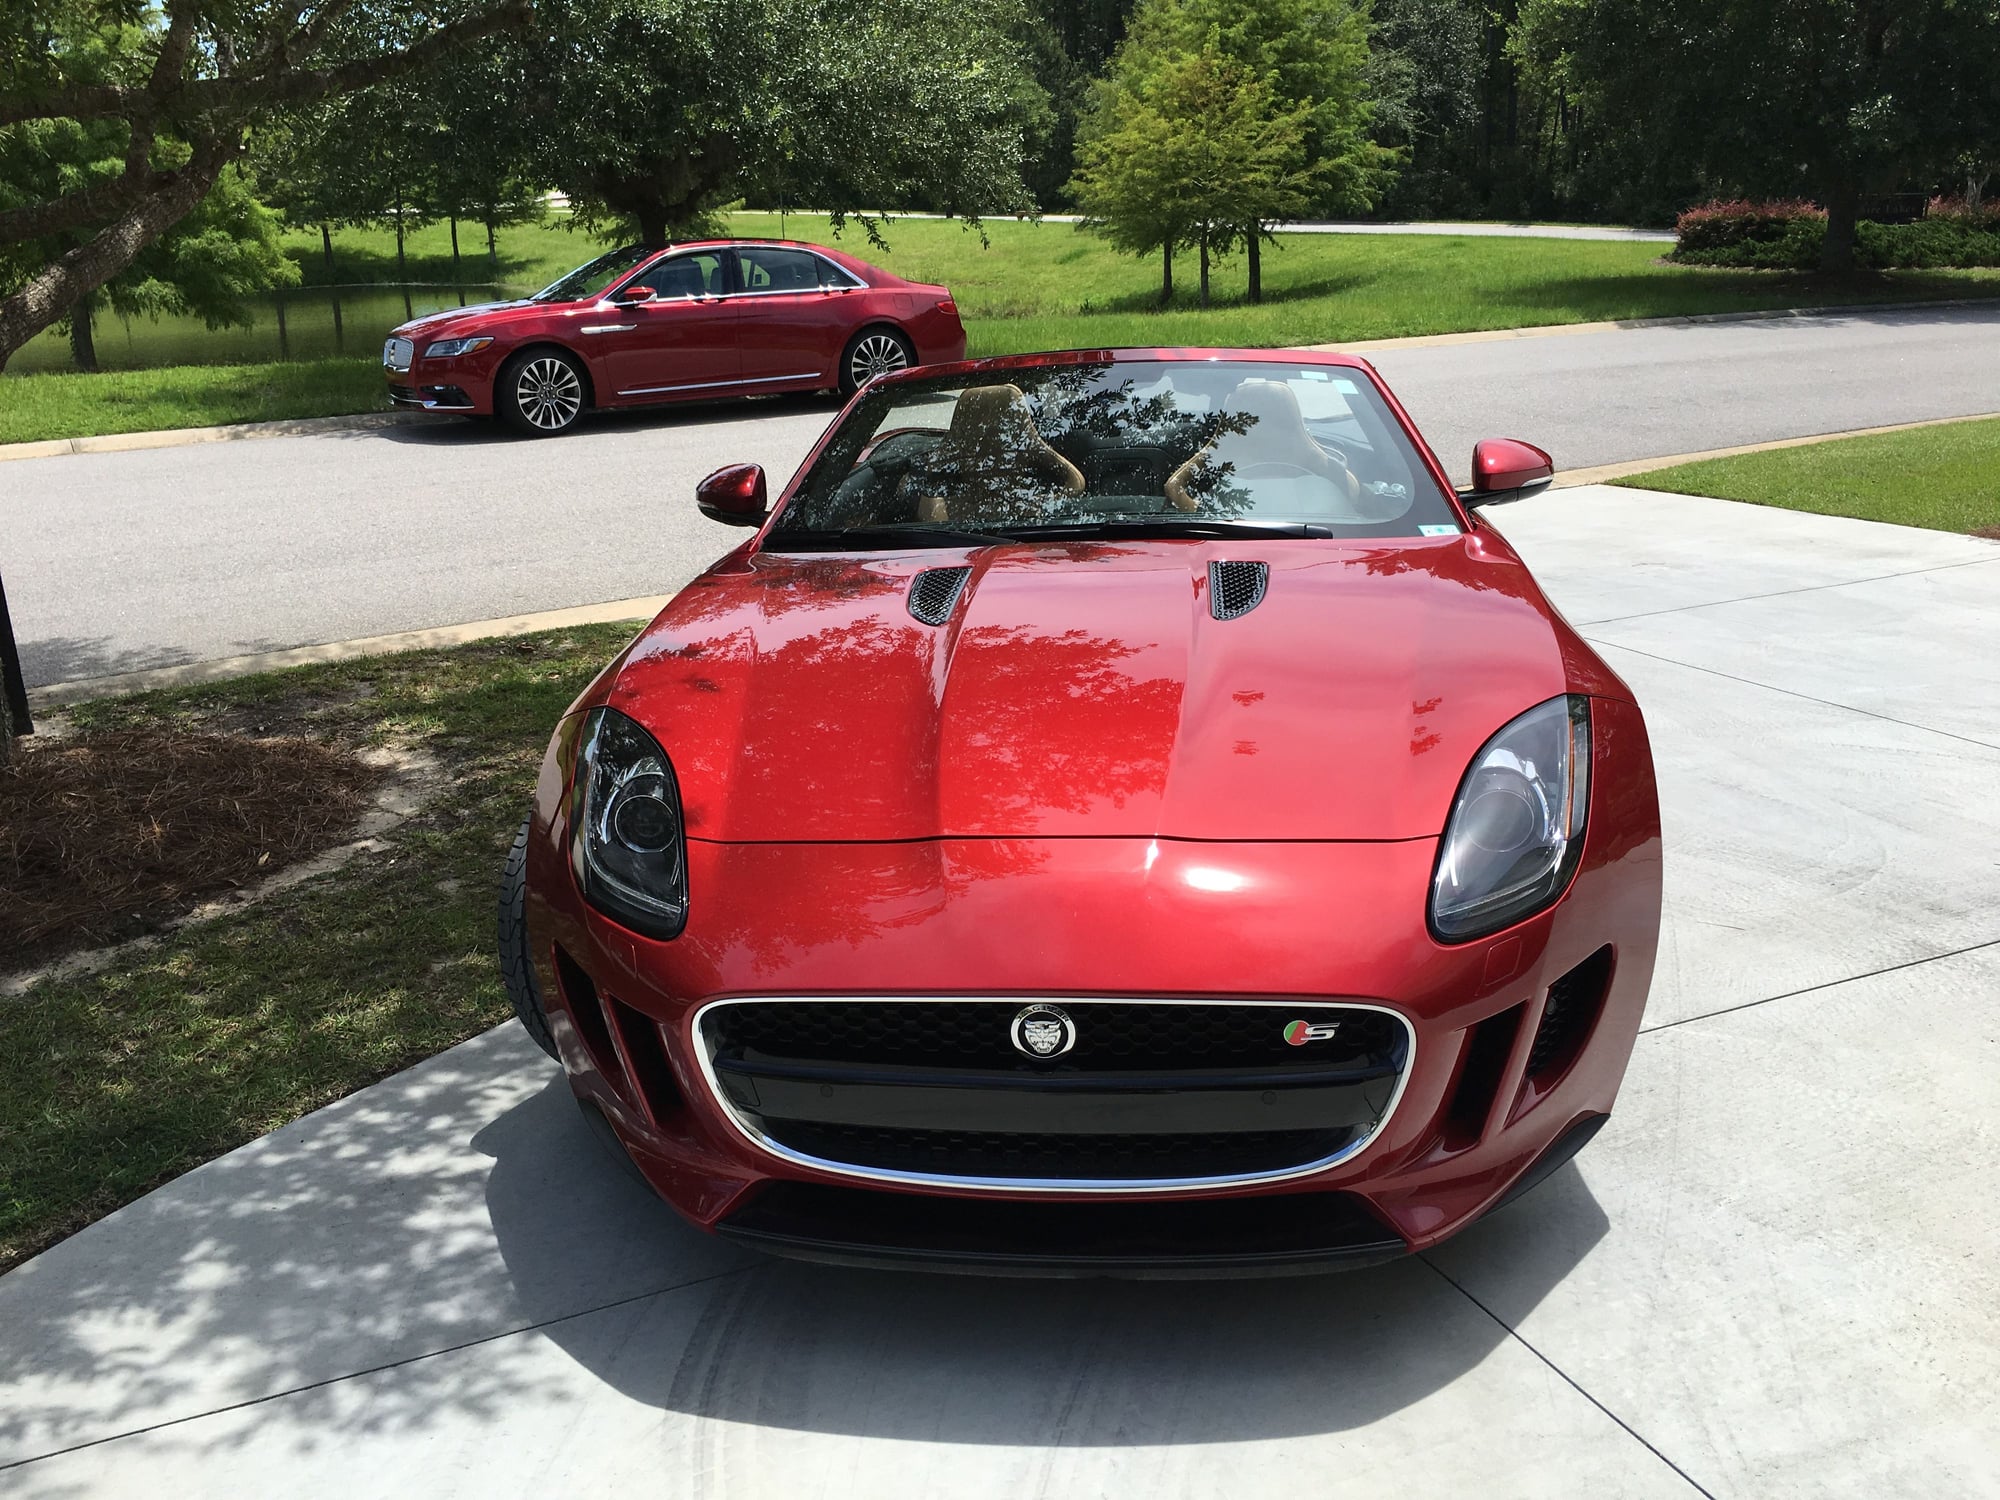 2014 Jaguar F-Type - 2014 F-type S Convertible Italian Racing Red - Used - VIN SAJWA6FCXE8K08702 - 26,100 Miles - 6 cyl - 2WD - Automatic - Convertible - Red - Bluffton, SC 29909, United States